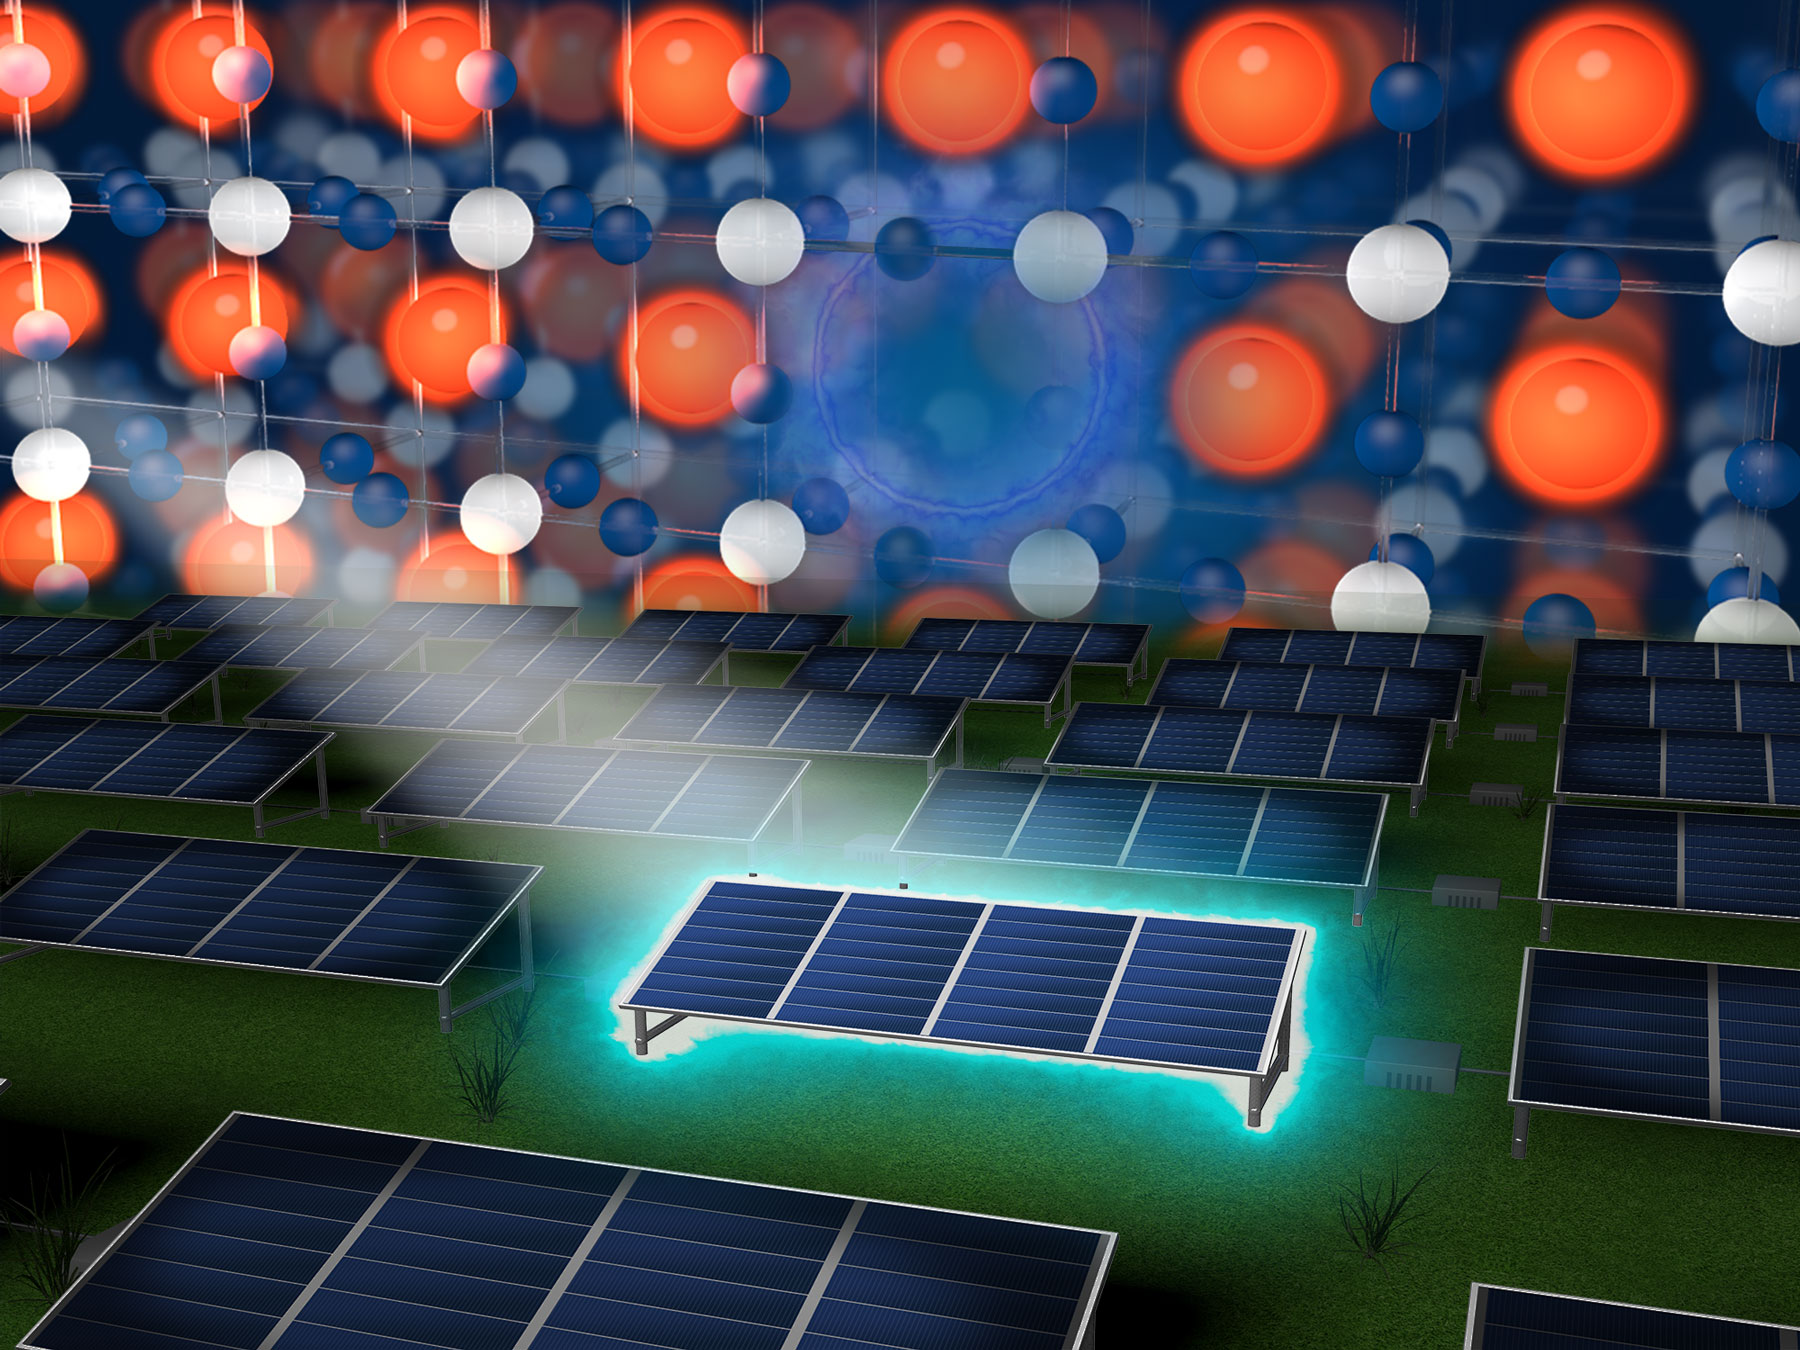 Positrons detect defects in solar cell material